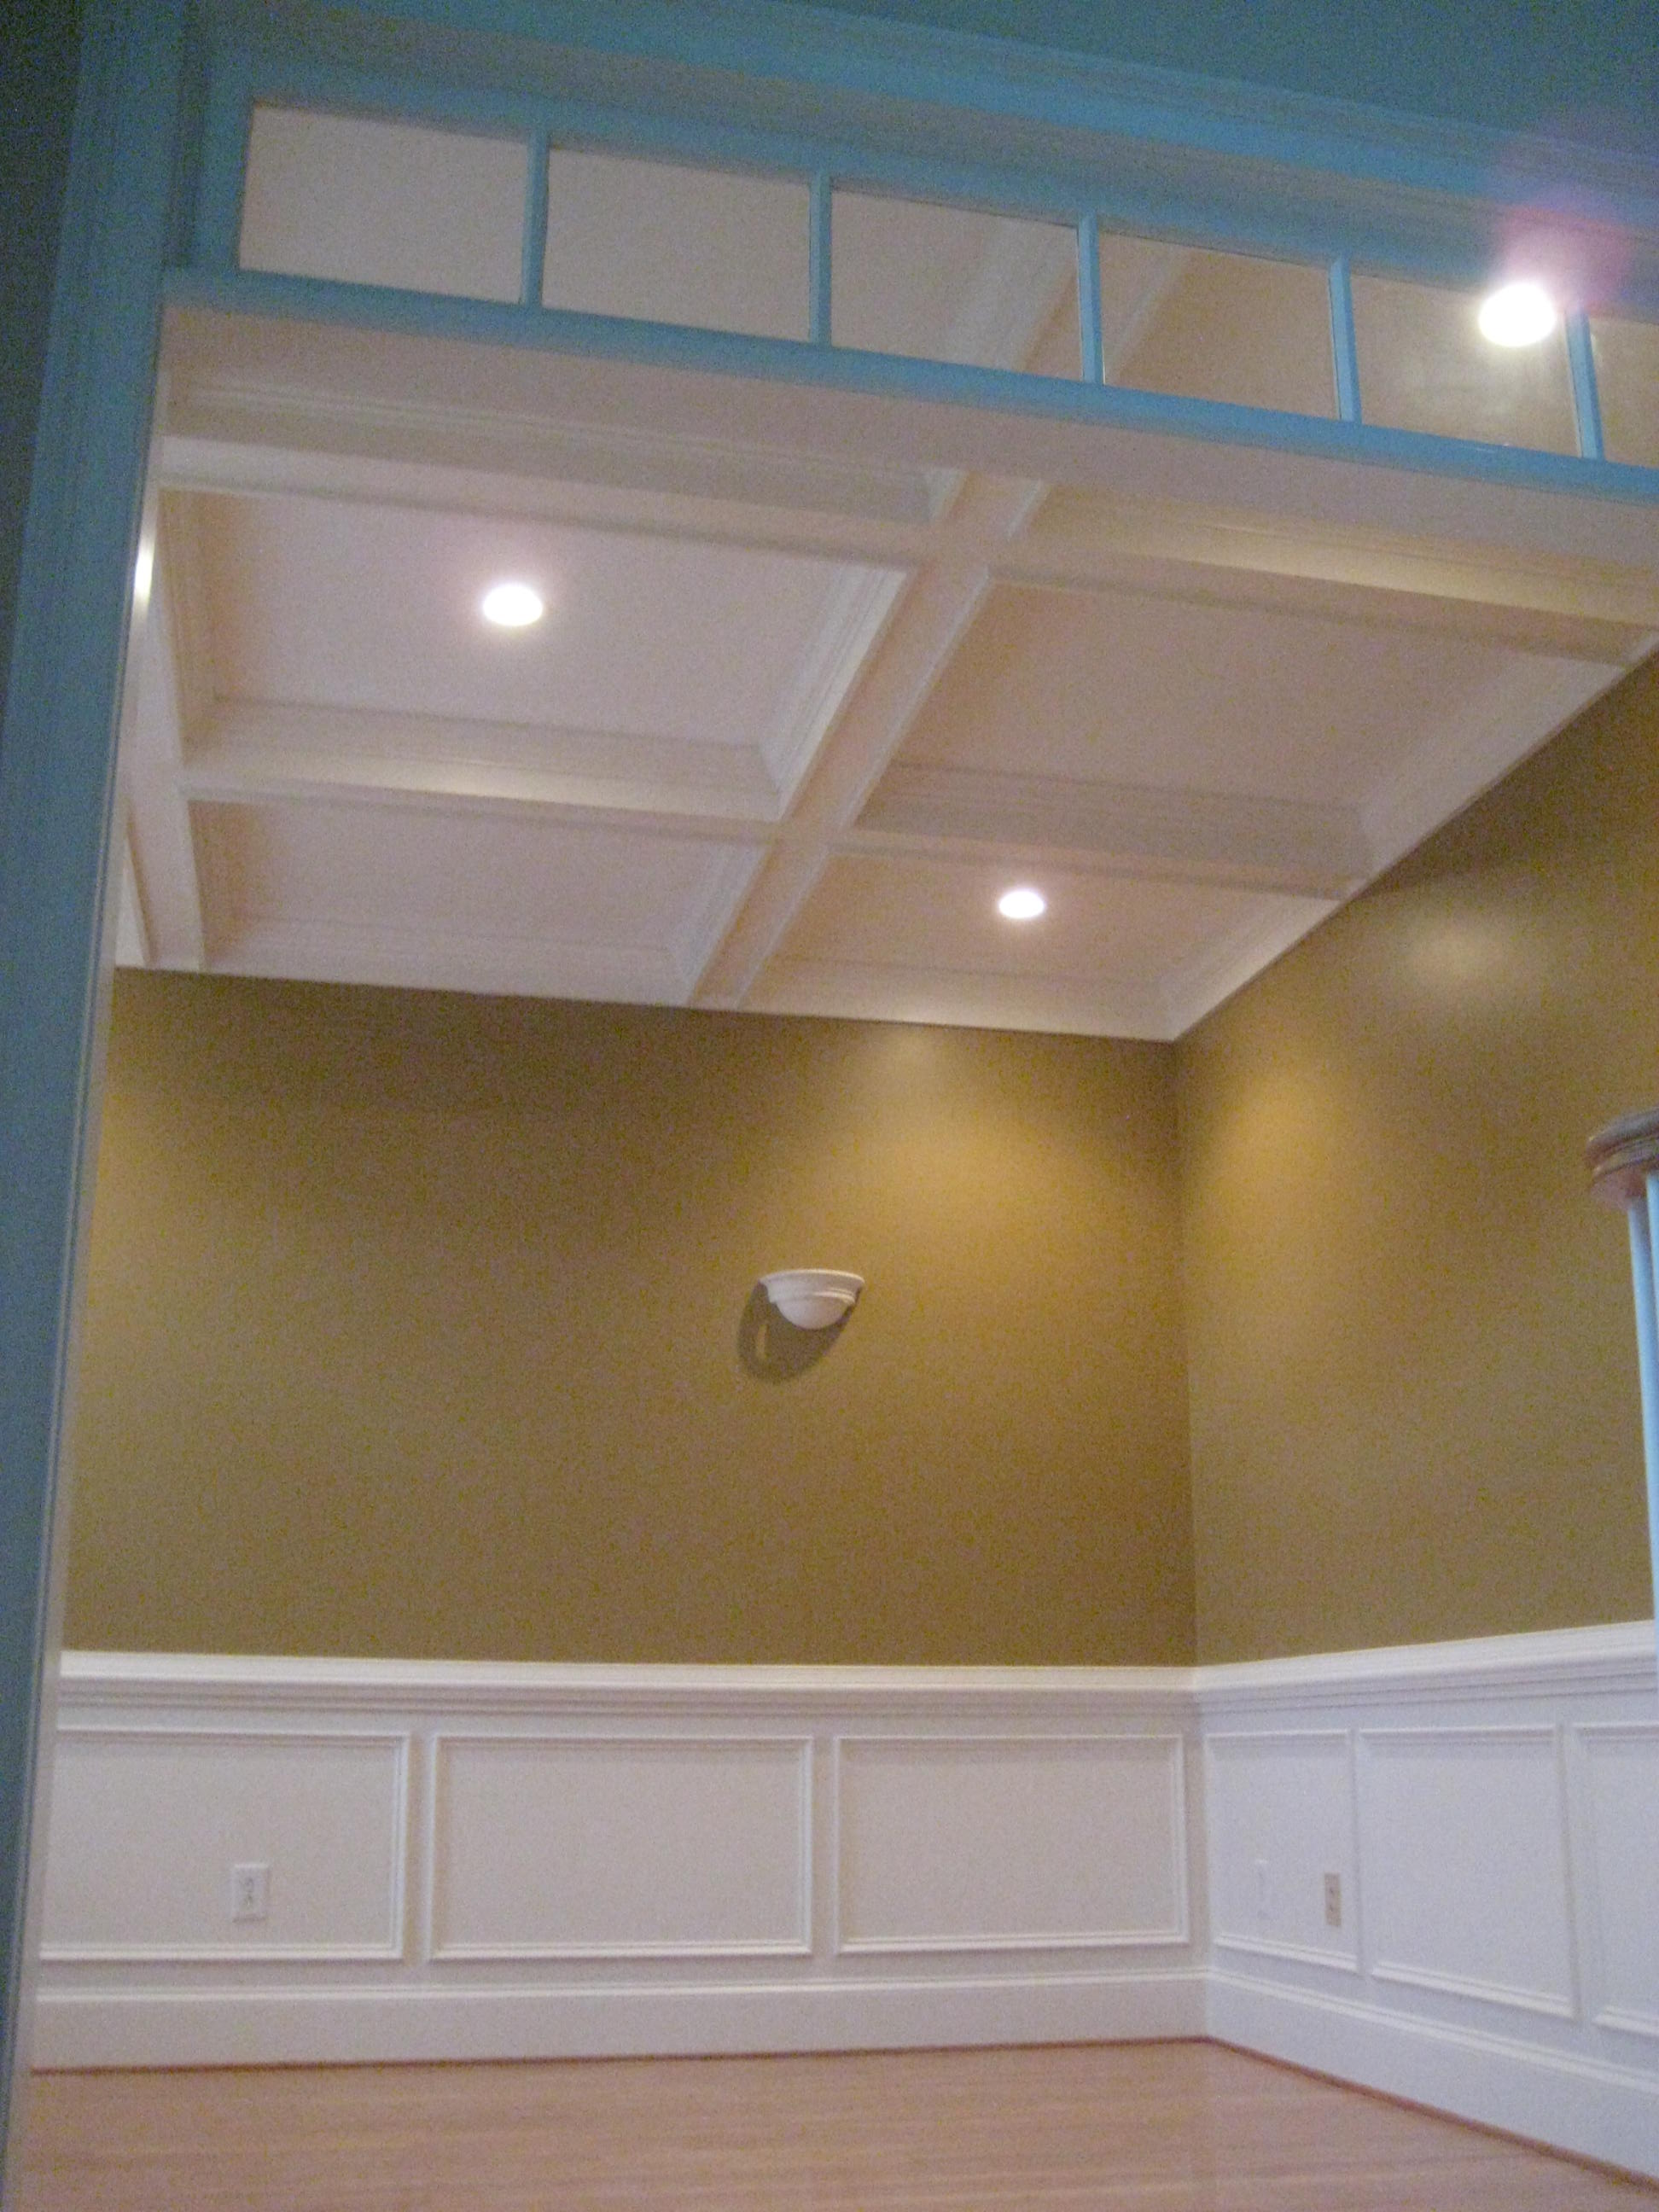 Remodel Living Room wall light sconces enhance coffered ceiling.